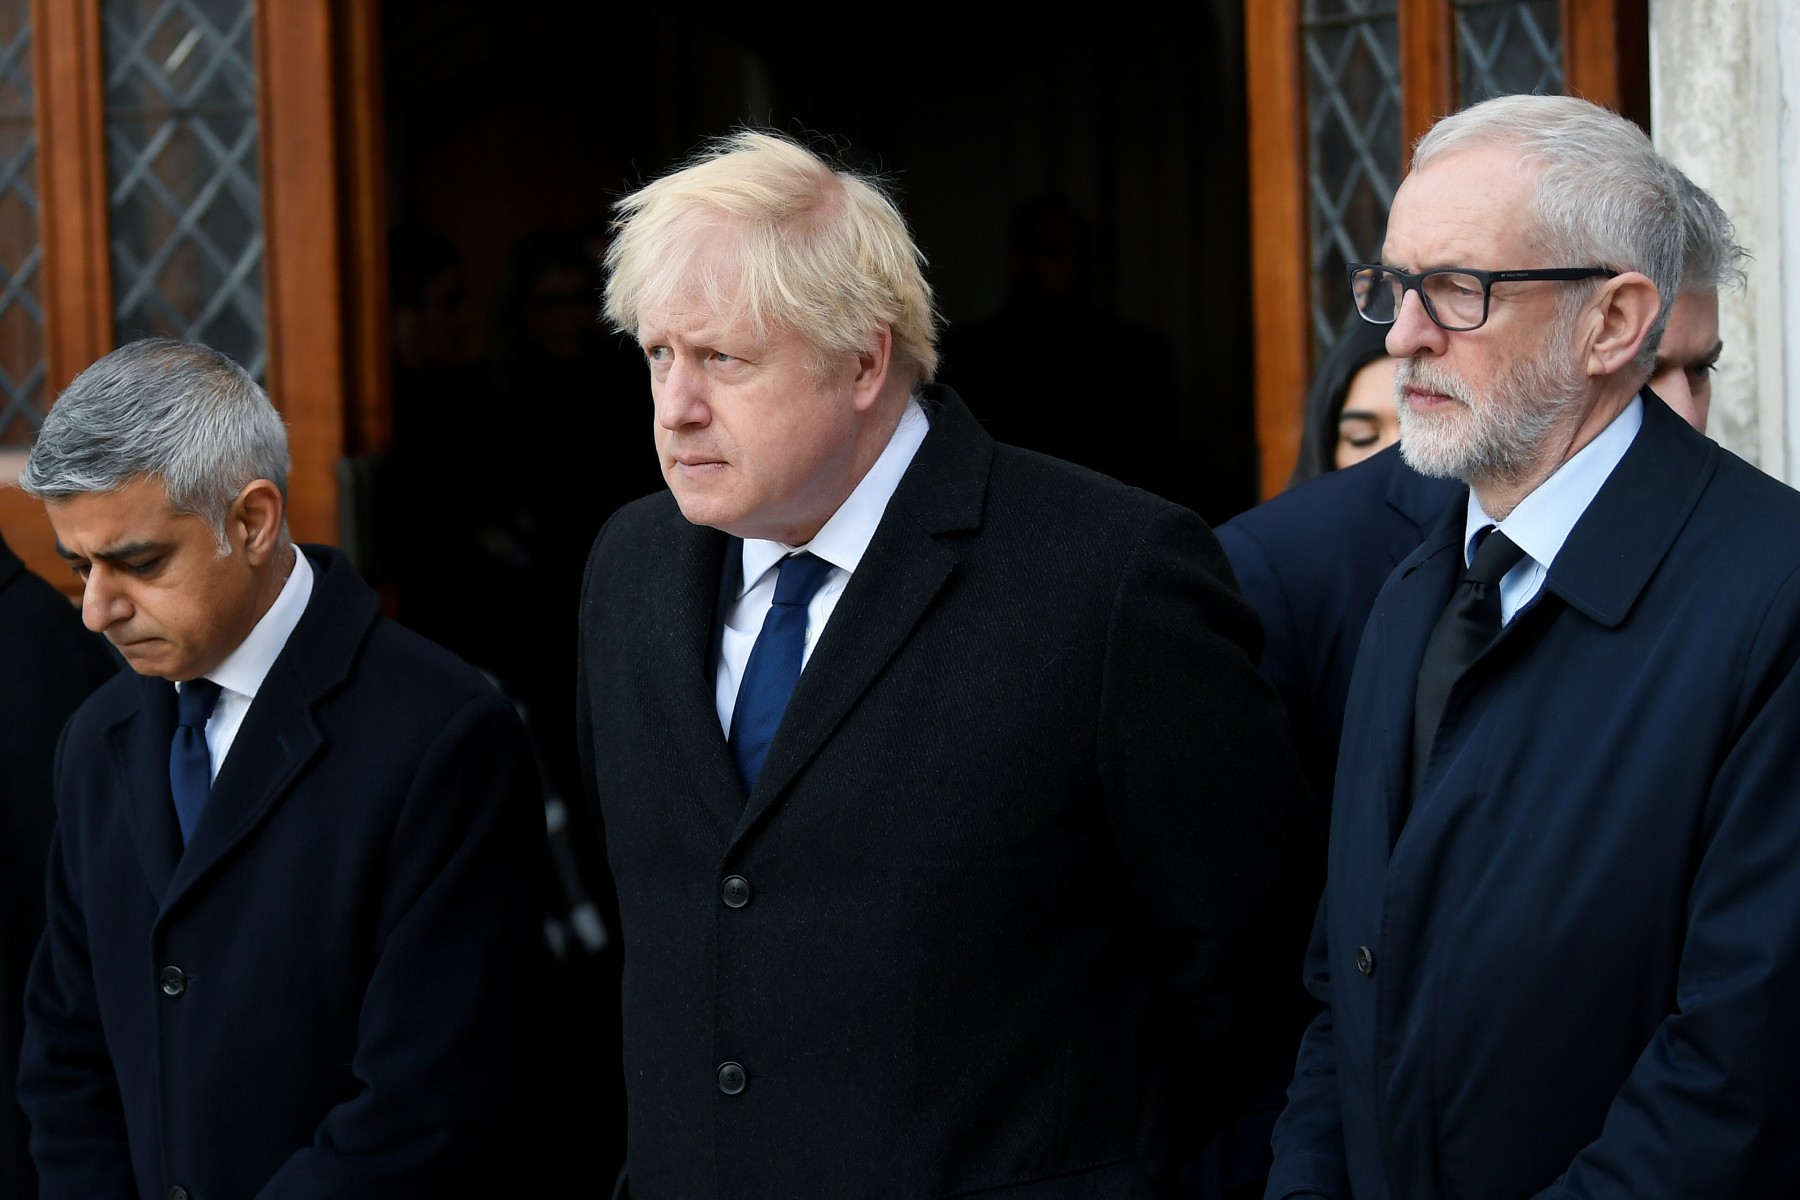 Sadiq Khan, Boris Johnson and Jeremy Corbyn honour a minute's silence at London's Guildhall today